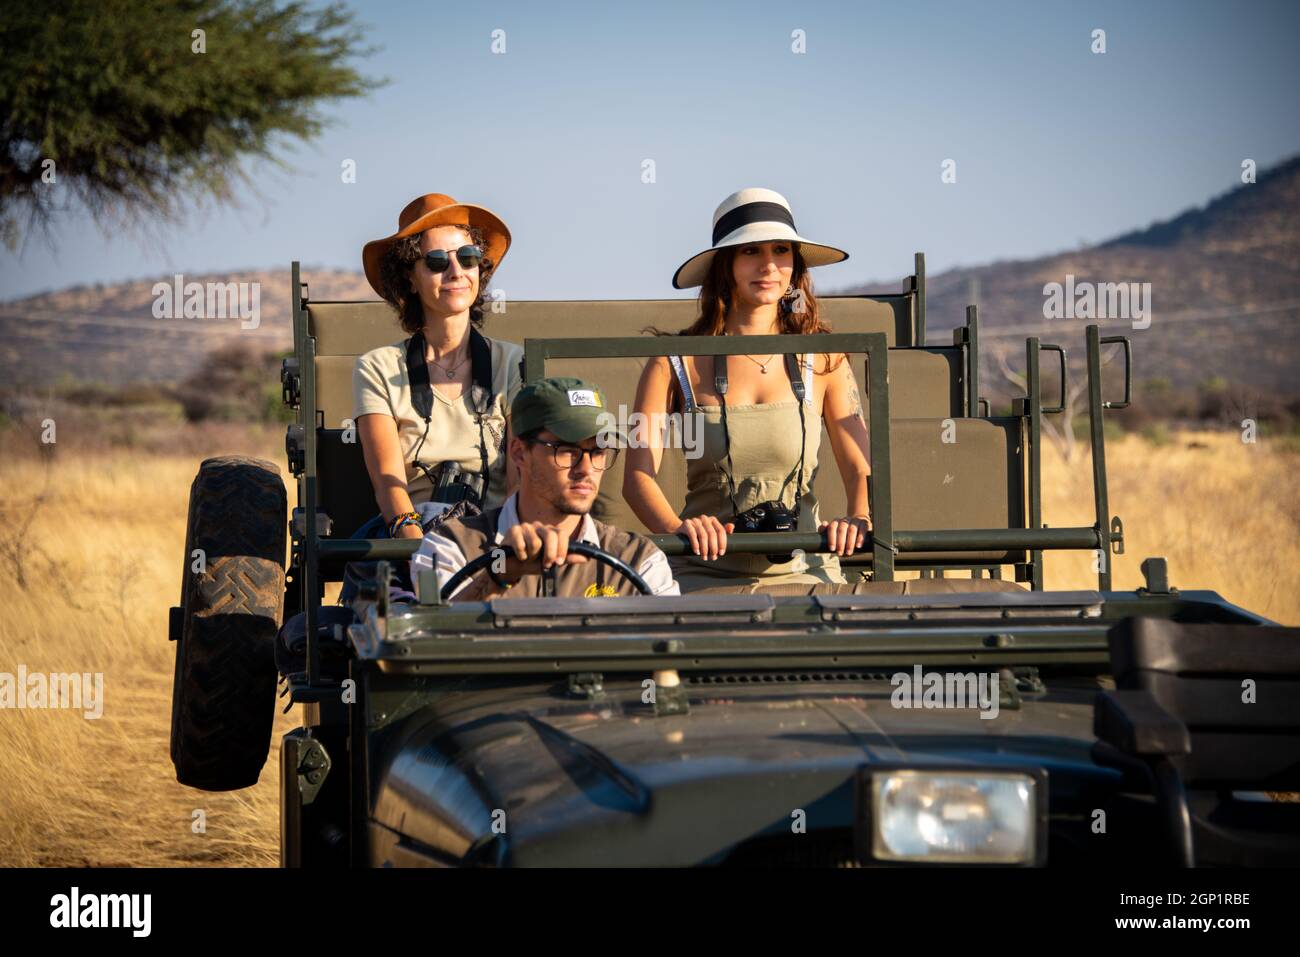 Guide drives two female guests past tree Stock Photo